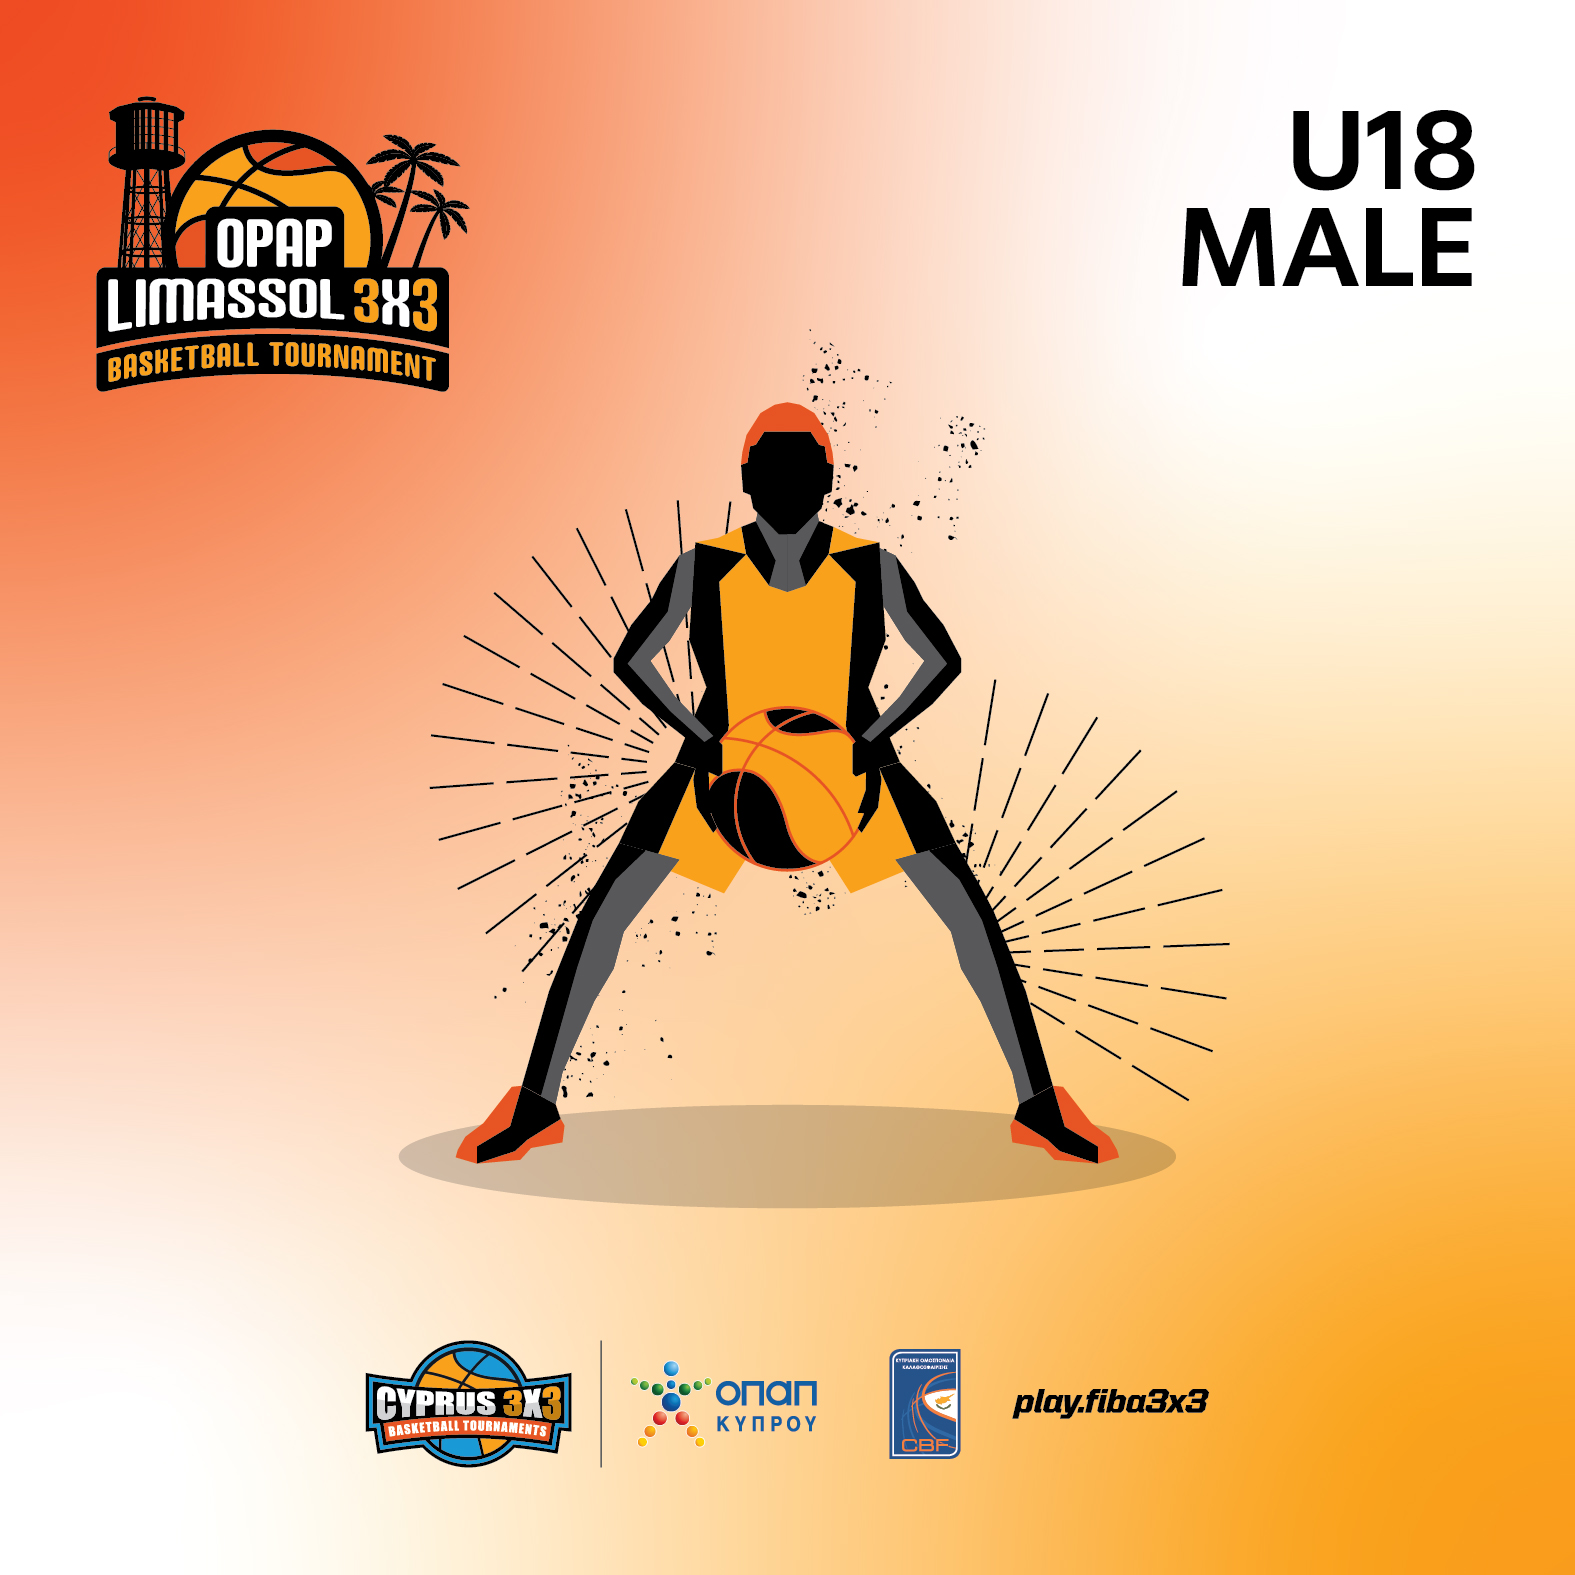 Read more about the article U18 Male – Limassol 3×3